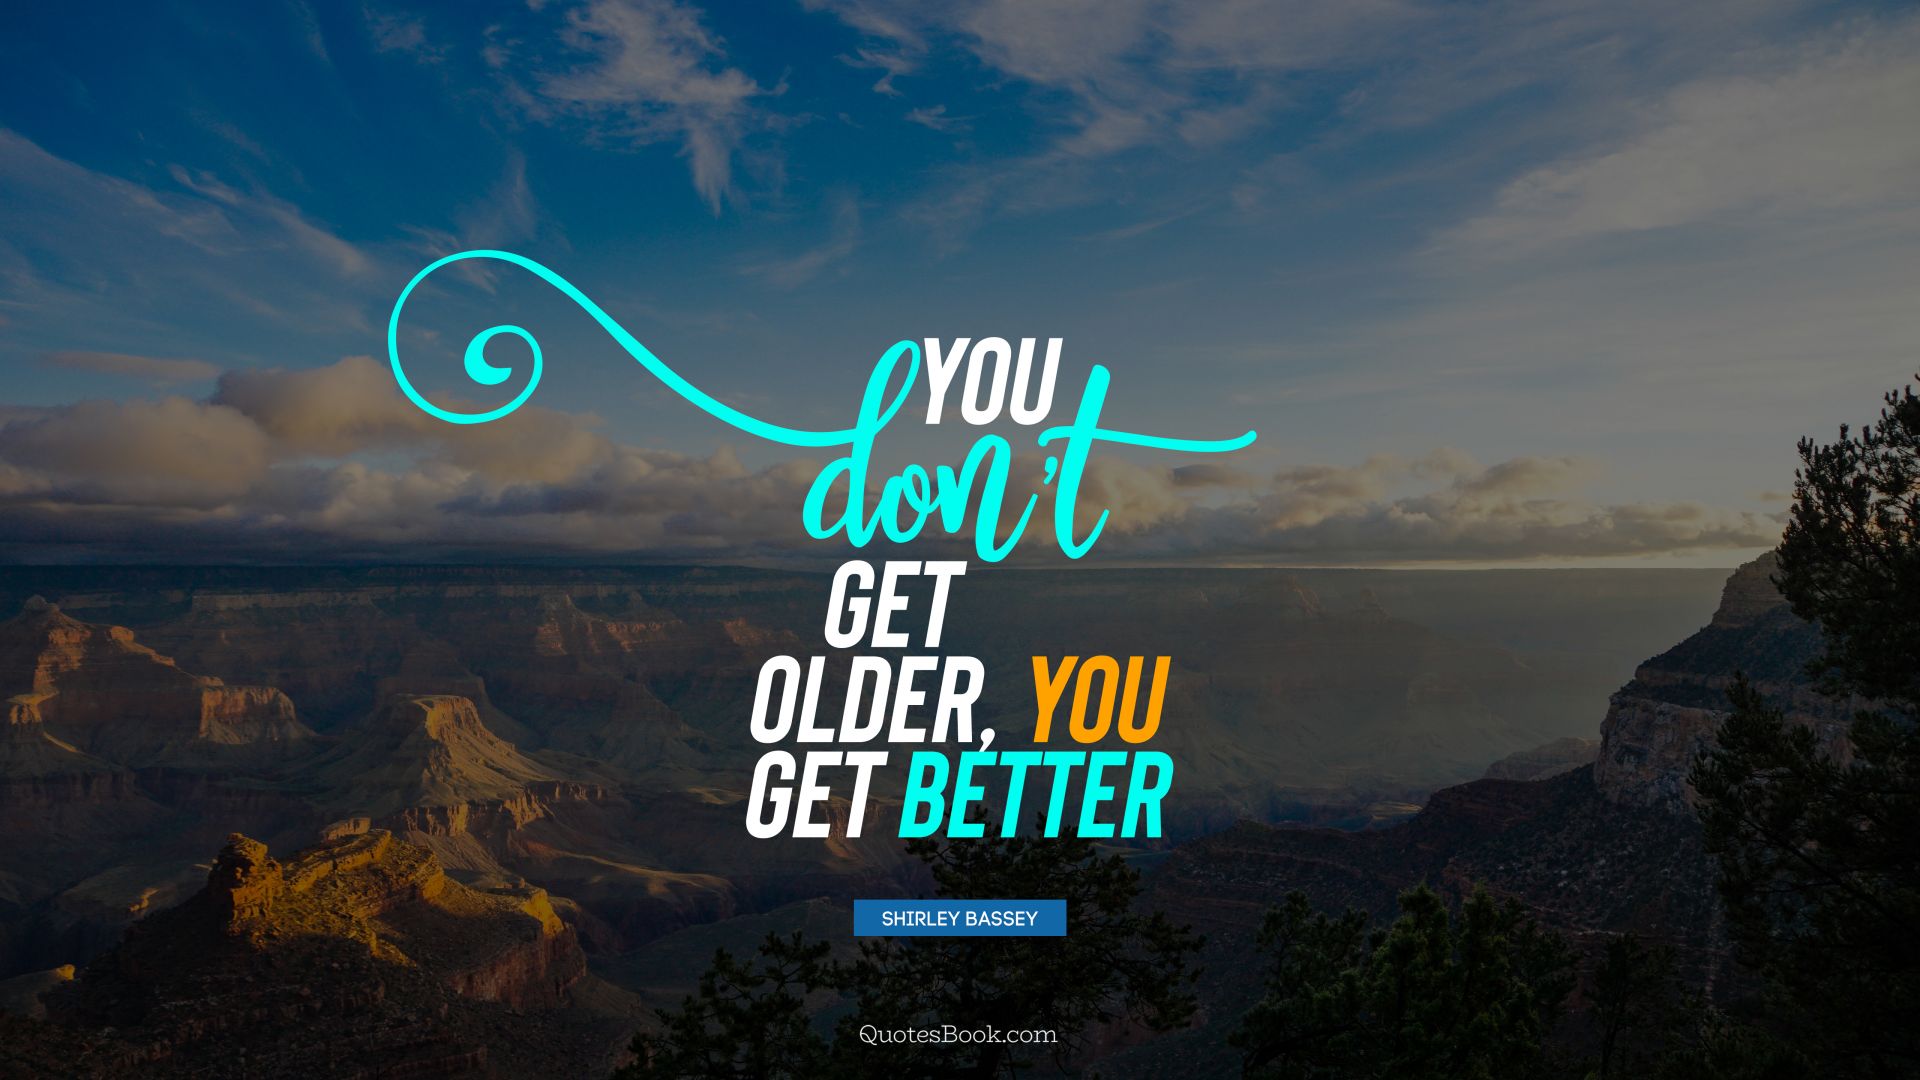 You don't get older, you get better. - Quote by Shirley Bassey